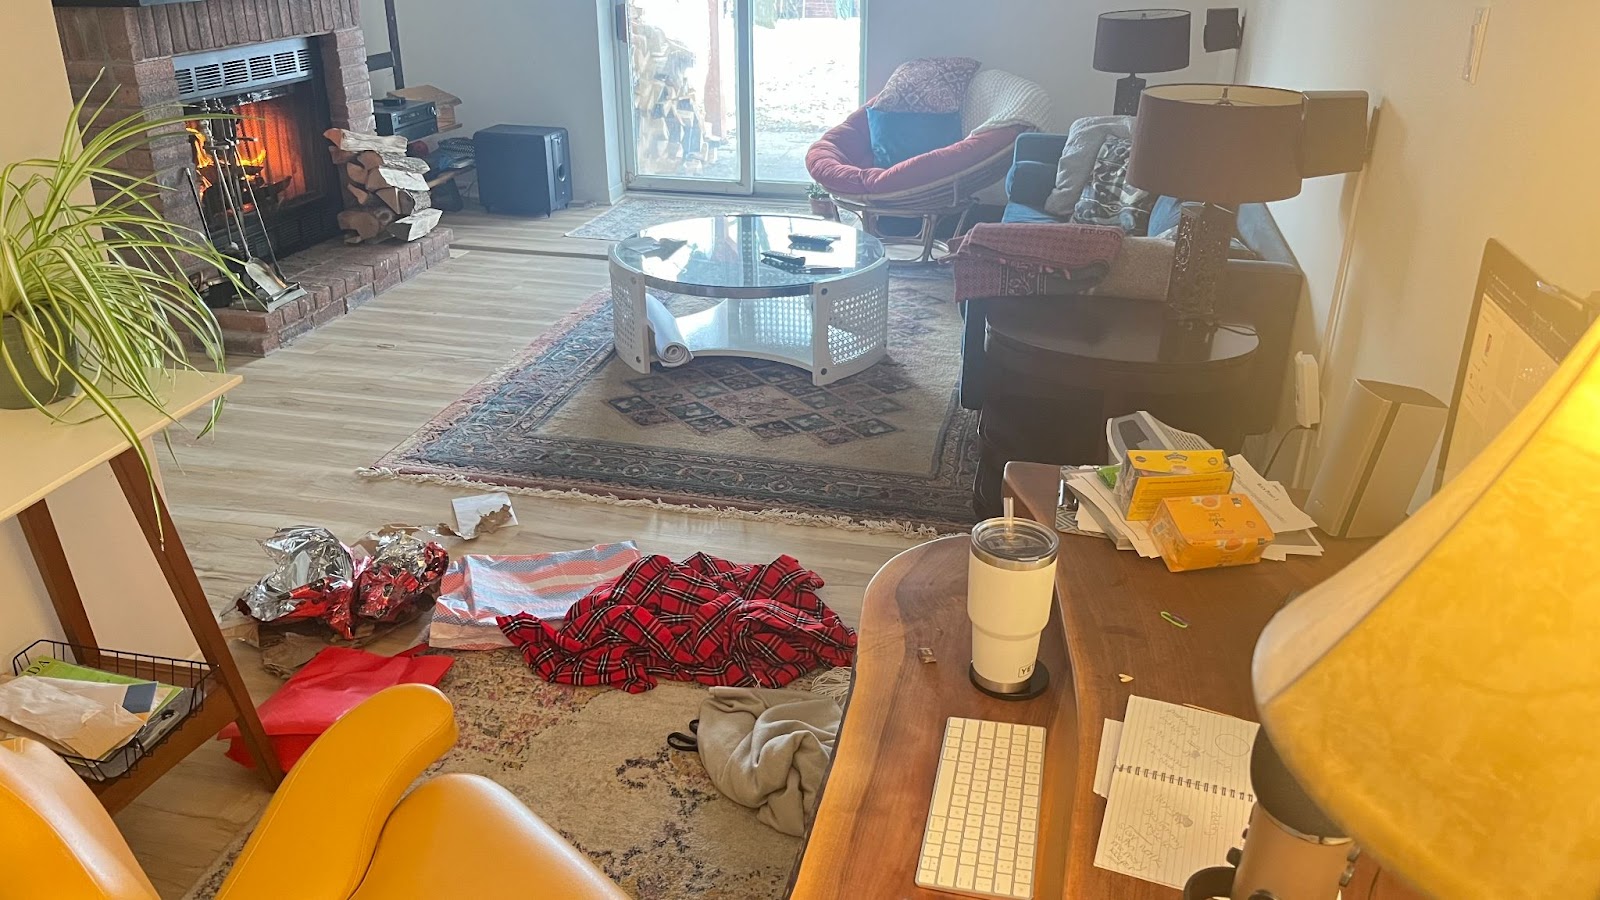 A lived-in room with a variety of items scattered around, suggesting everyday use or recent activity. On the left, there's a fireplace with a visible flame behind a mesh screen, flanked by firewood and a plant on a wooden shelf. The floor is covered with a huge area rug over which a smaller rug is laid. In the center, a round glass coffee table is surrounded by a cozy orange papasan, a teal sofa with throw pillows, and a side table with lamps. Strewn across the room: a red and black plaid blanket, a grey hoodie, foil wrappers, papers, and a couple of boxes with bright yellow packaging. On the right, there's a desk with a keyboard, a notepad with doodles, and a white tumbler. The room has a cozy ambiance, accentuated by the natural light coming through the glass patio door on the left. The scene captures a casual, personal space with signs of daily life and work.